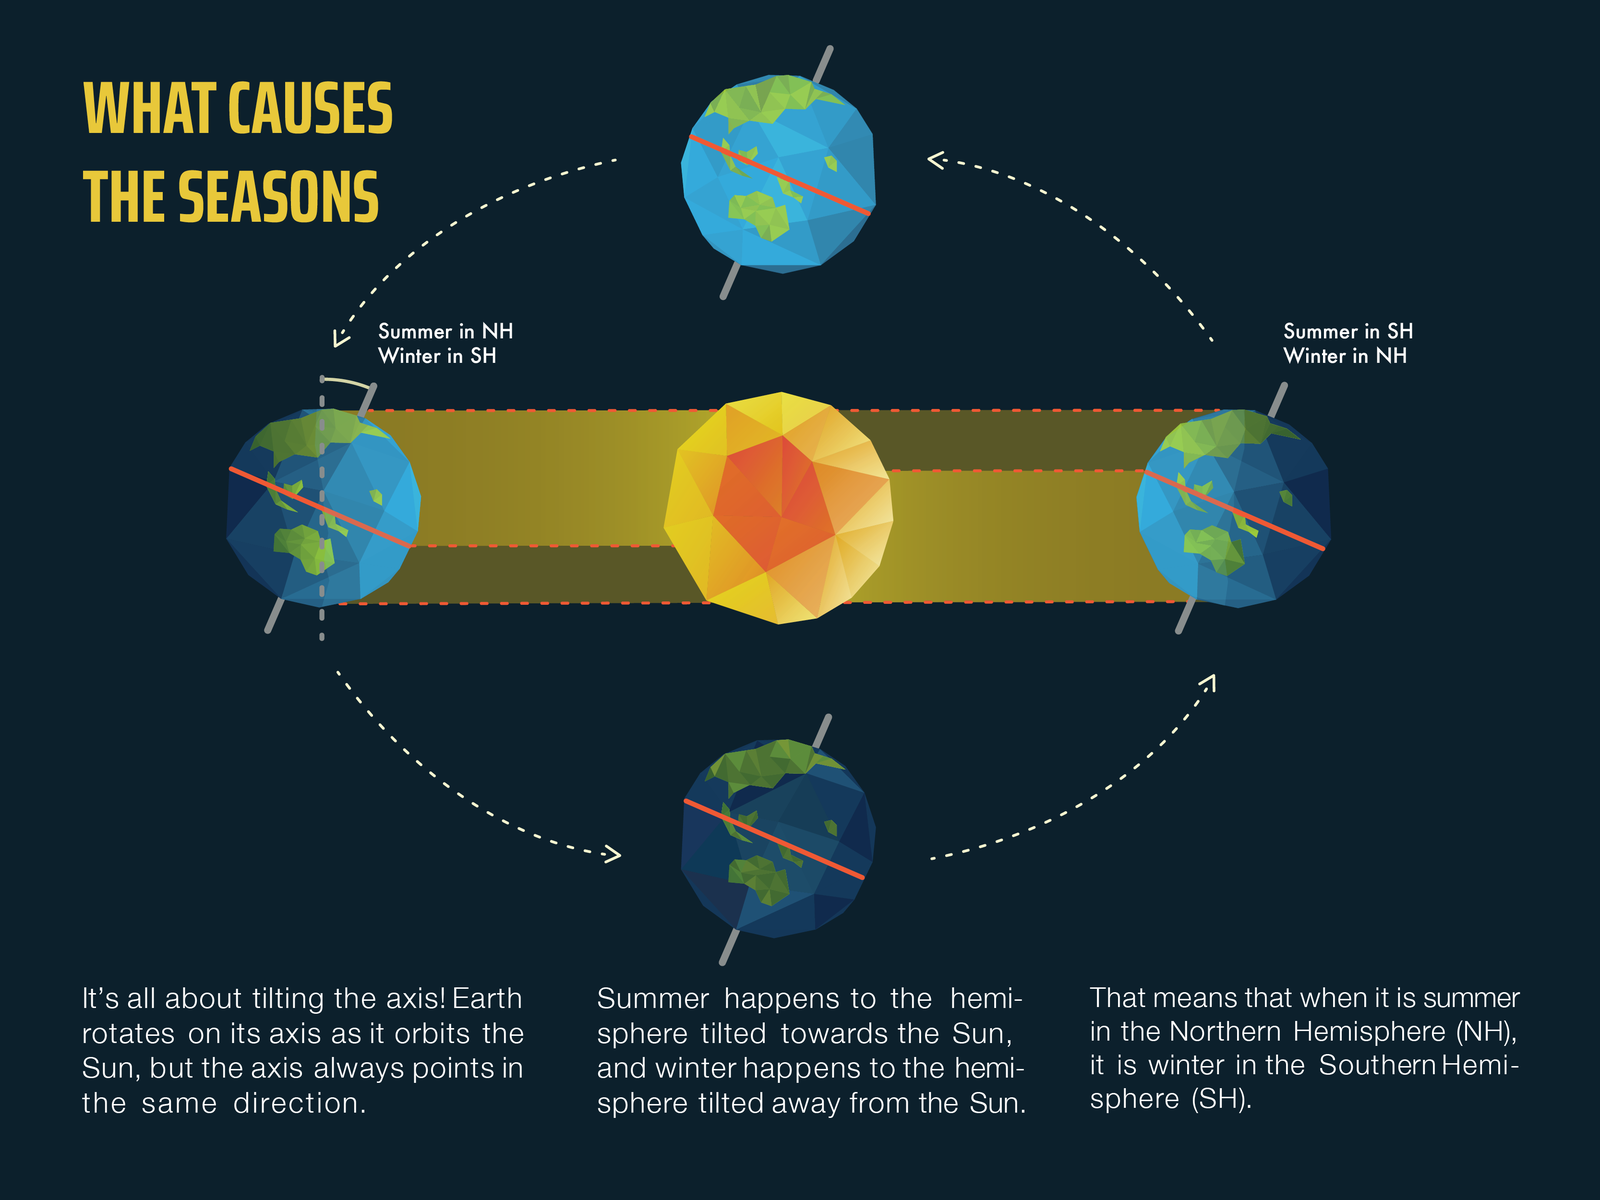 What causes the seasons by Jenya Andreeva on Dribbble